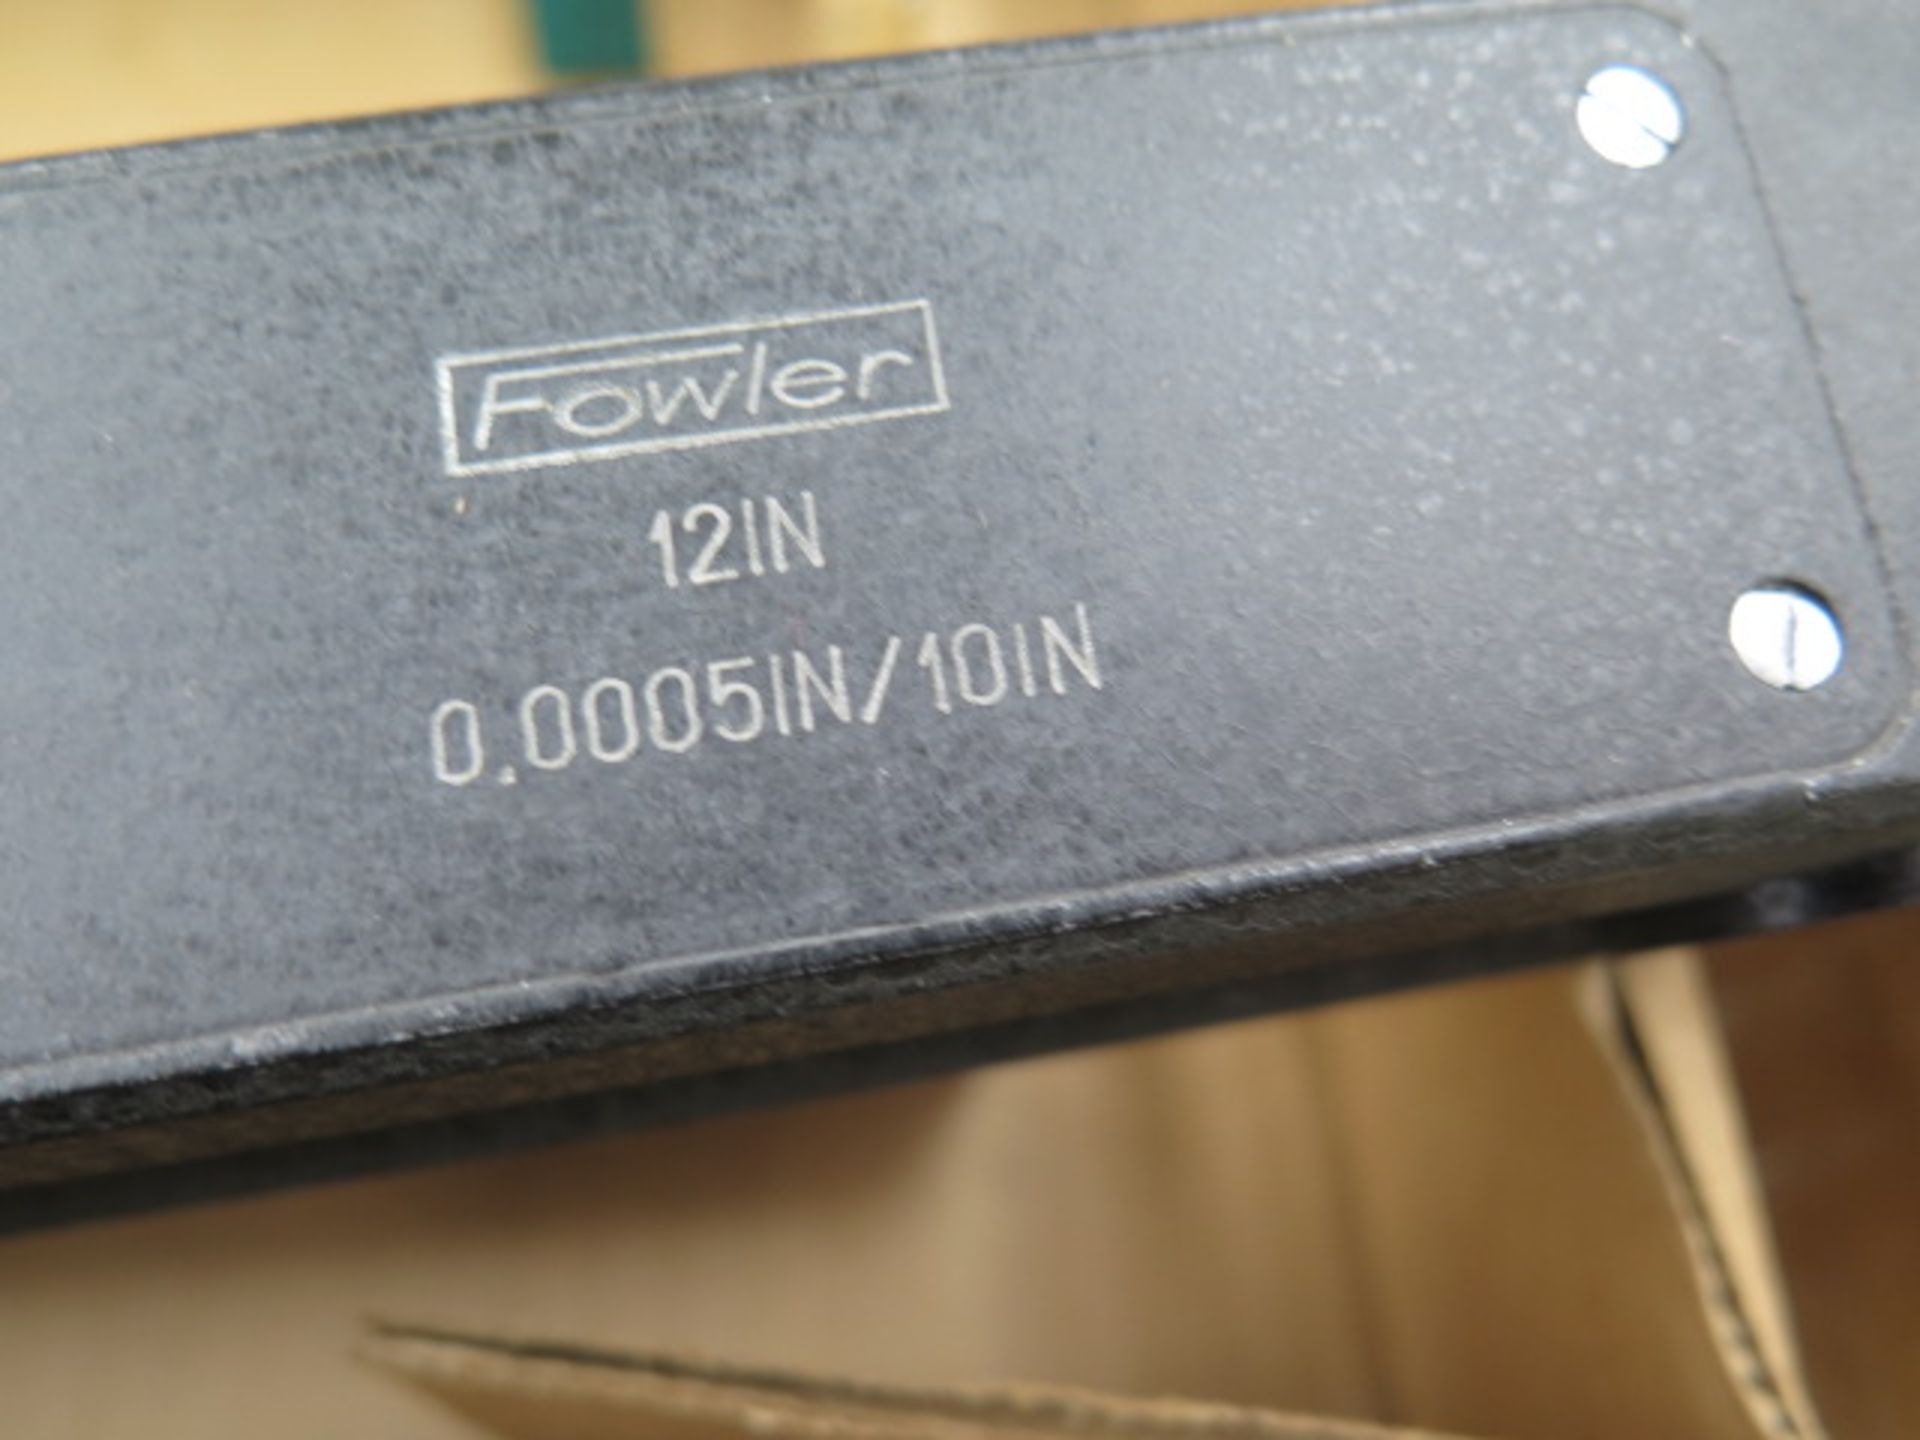 Fowler 12" Master Level and Fowler Sine Bar (SOLD AS-IS - NO WARRANTY) - Image 4 of 7